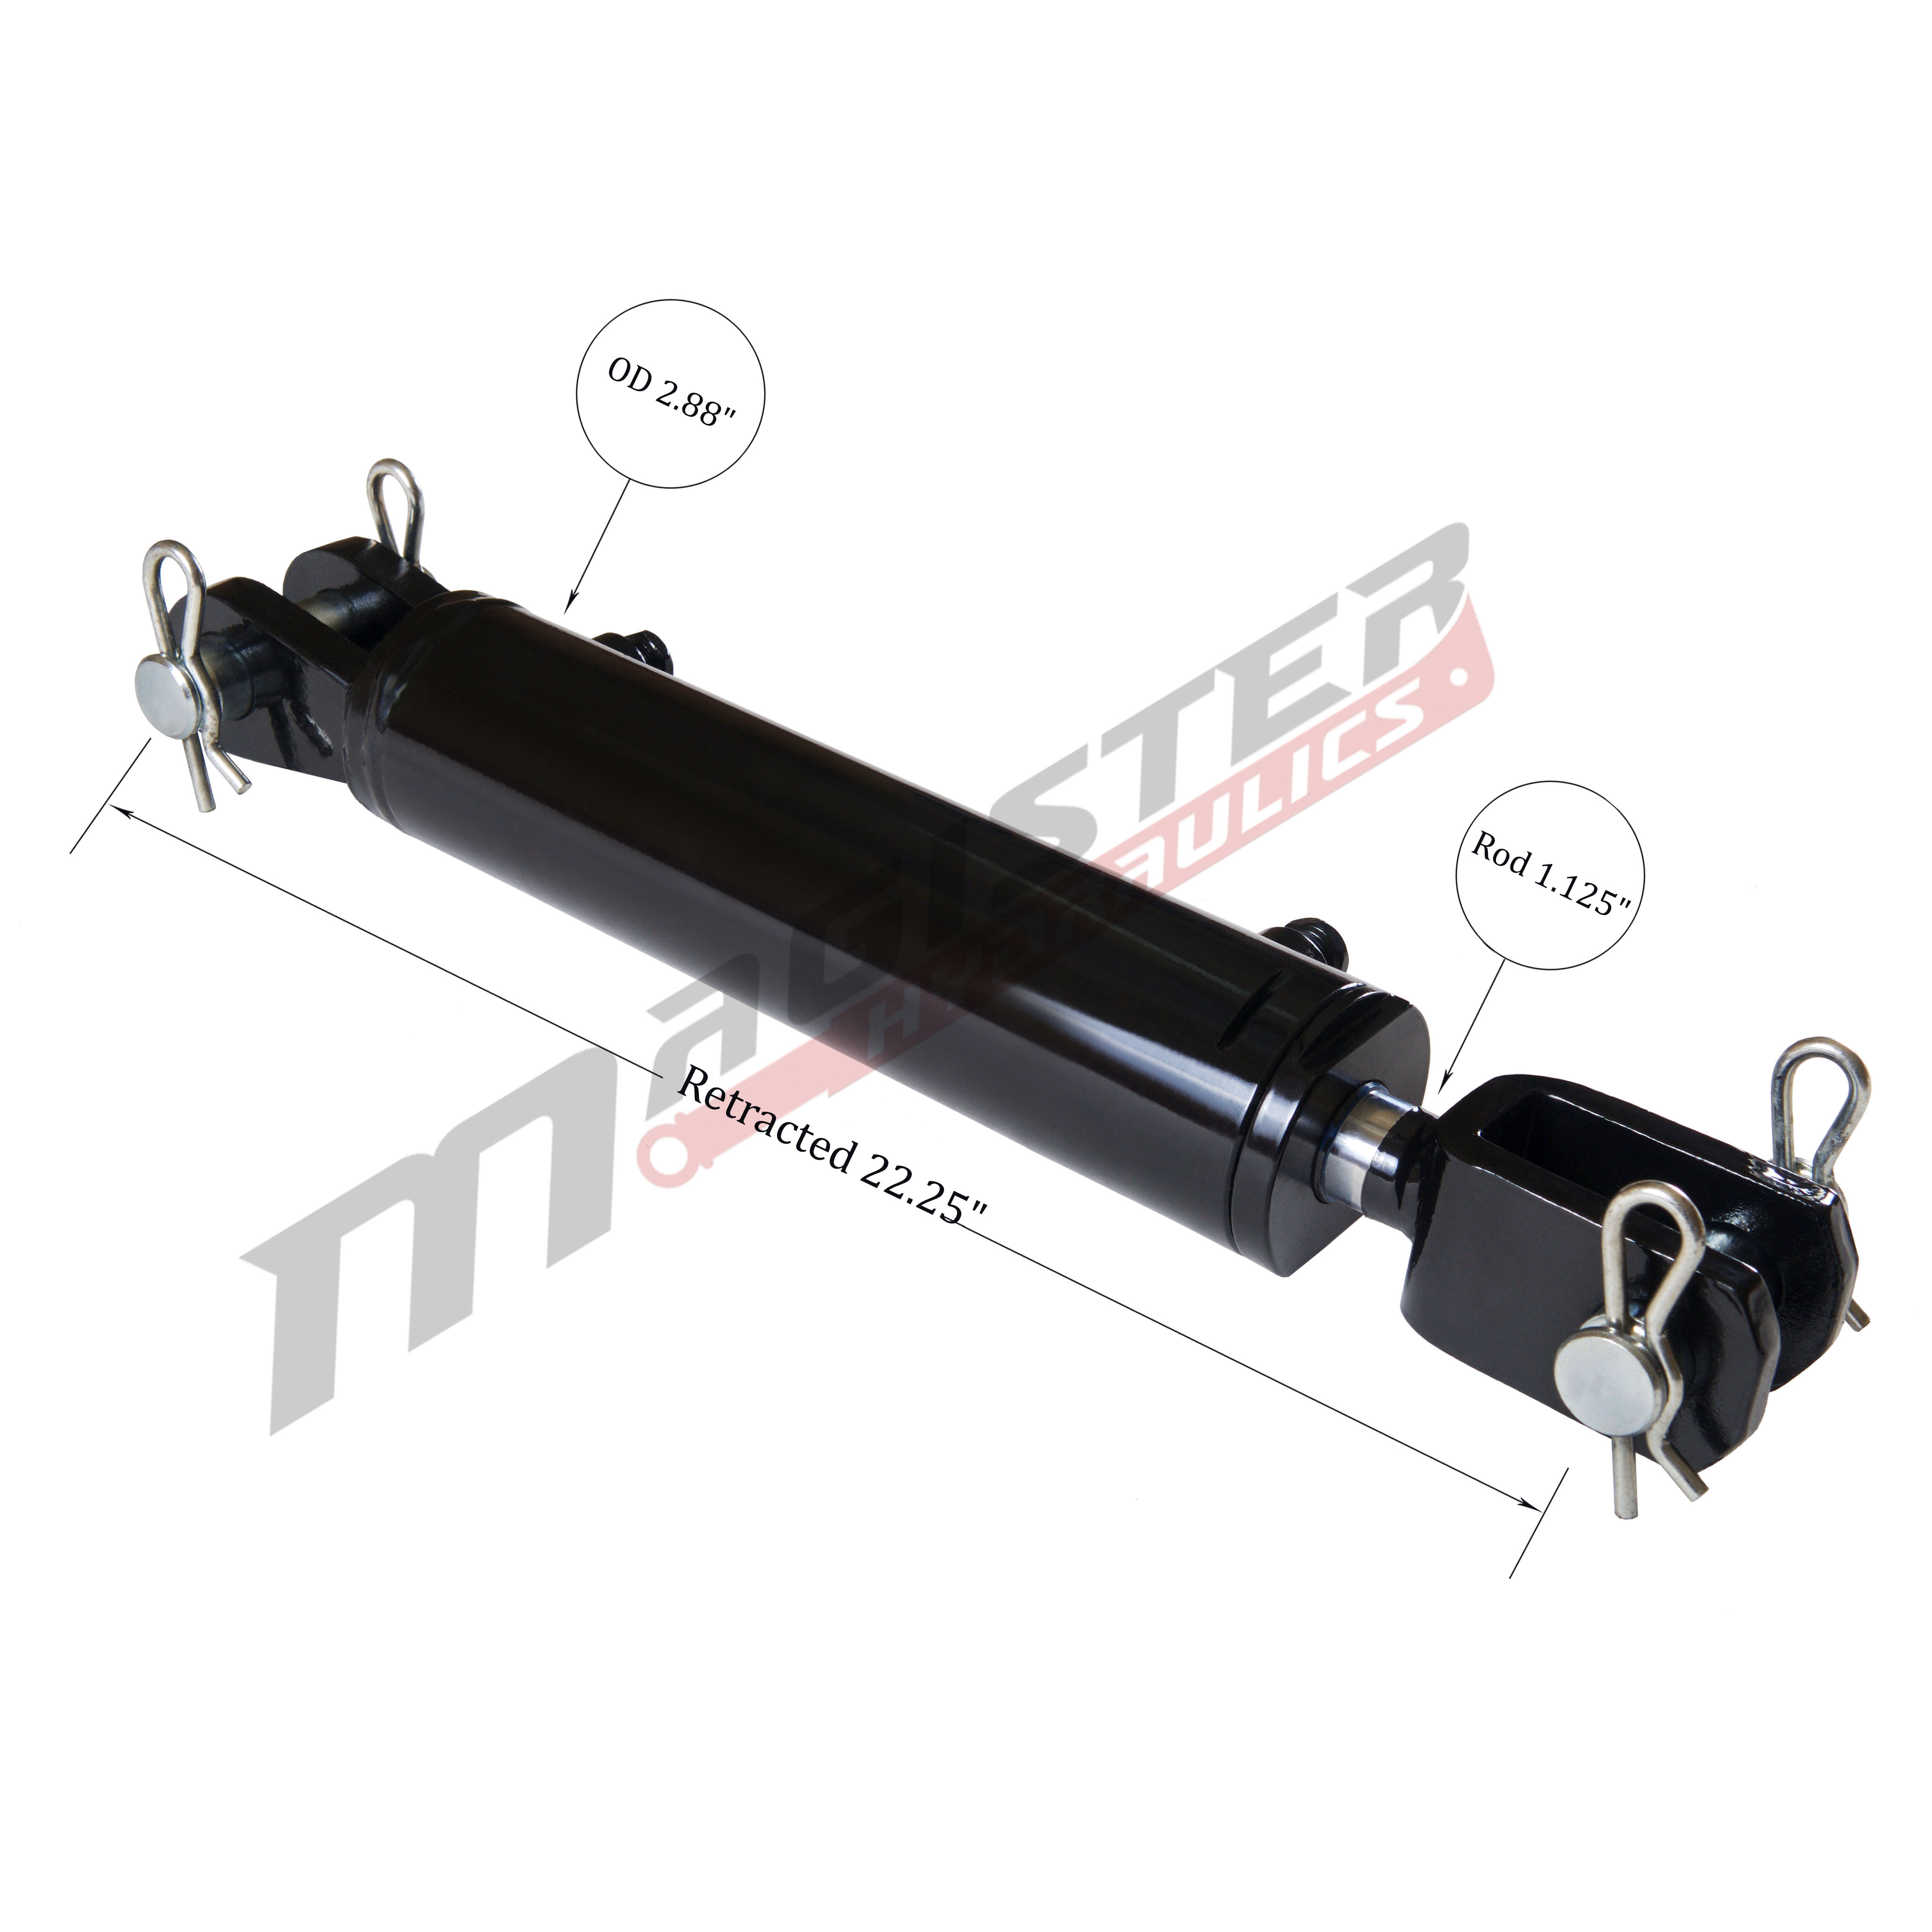 2.5 bore x 12 stroke hydraulic cylinder, ag clevis double acting cylinder | Magister Hydraulics